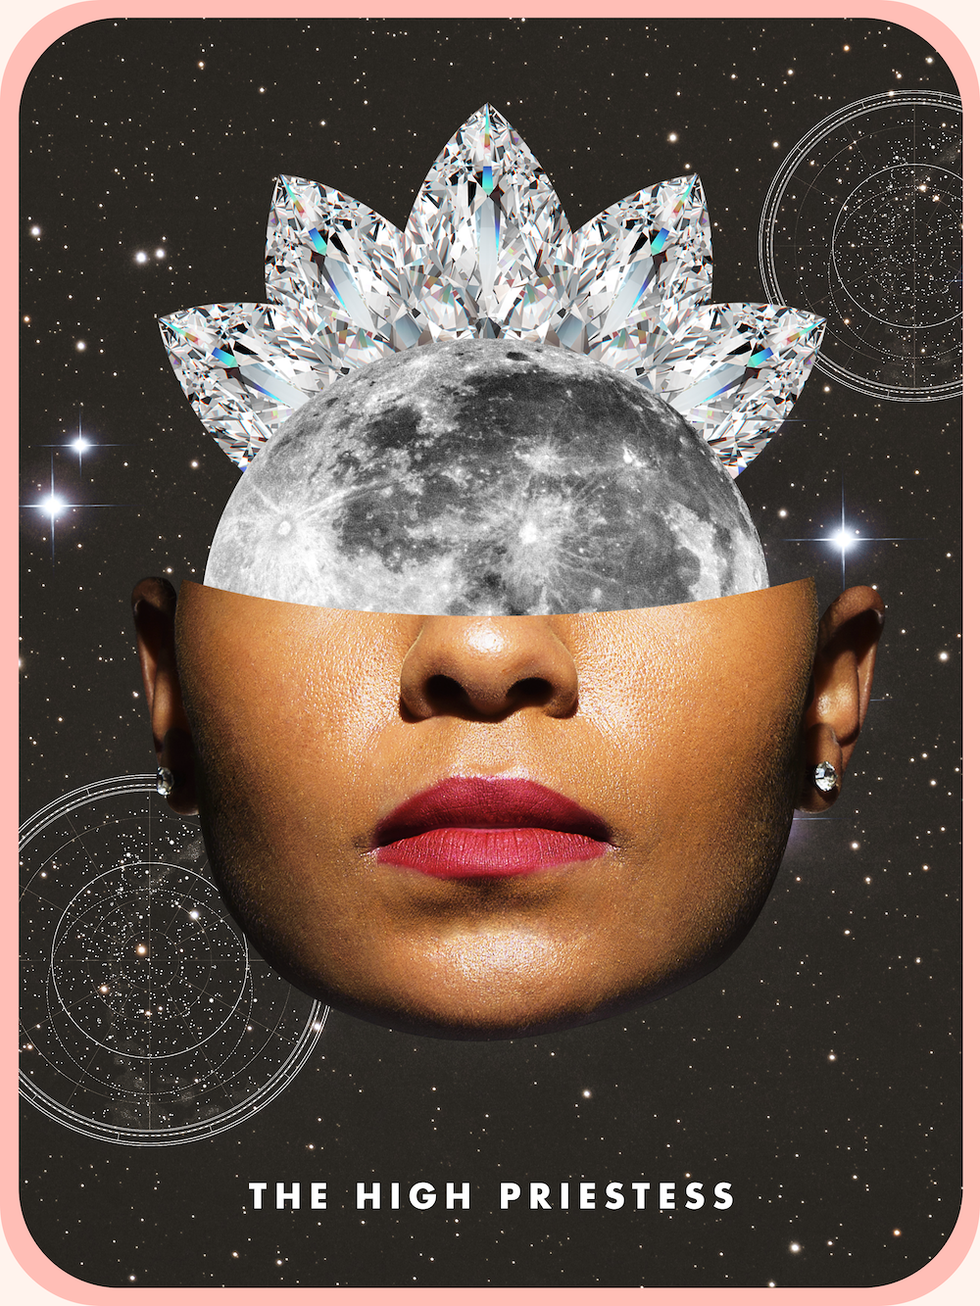 the high priestess tarot card, showing the bottom half of a black woman's face with red lipstick and diamond earrings with a full moon behind her